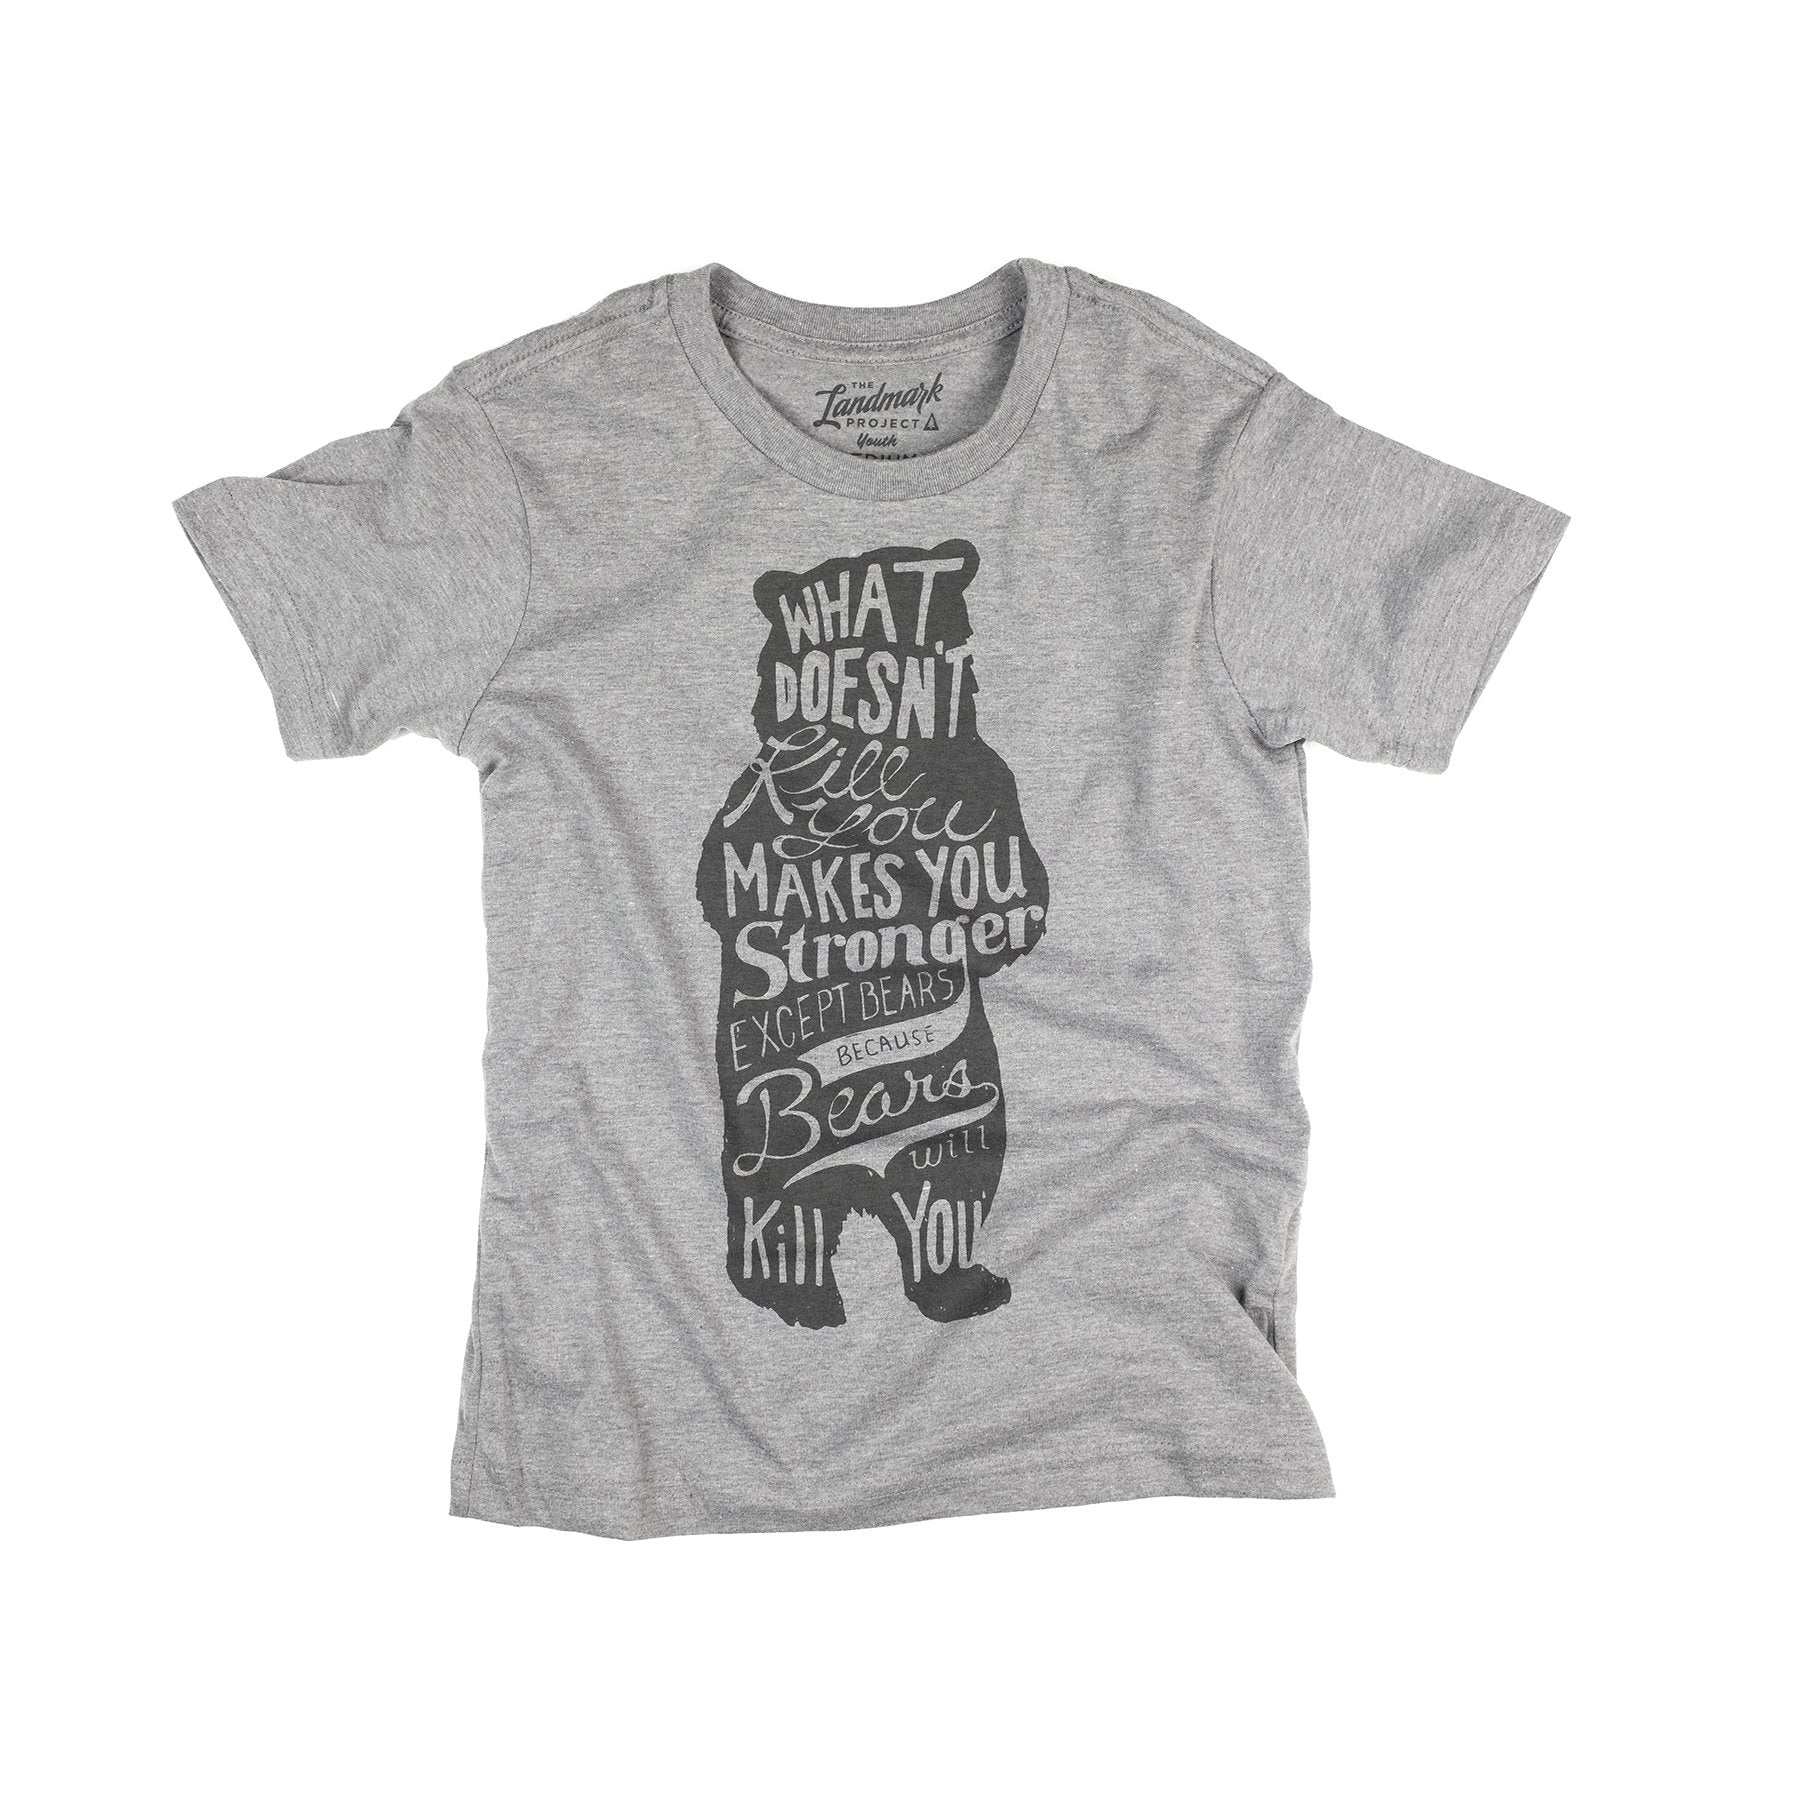 Bear Youth Tee Big Adventure Outfitters